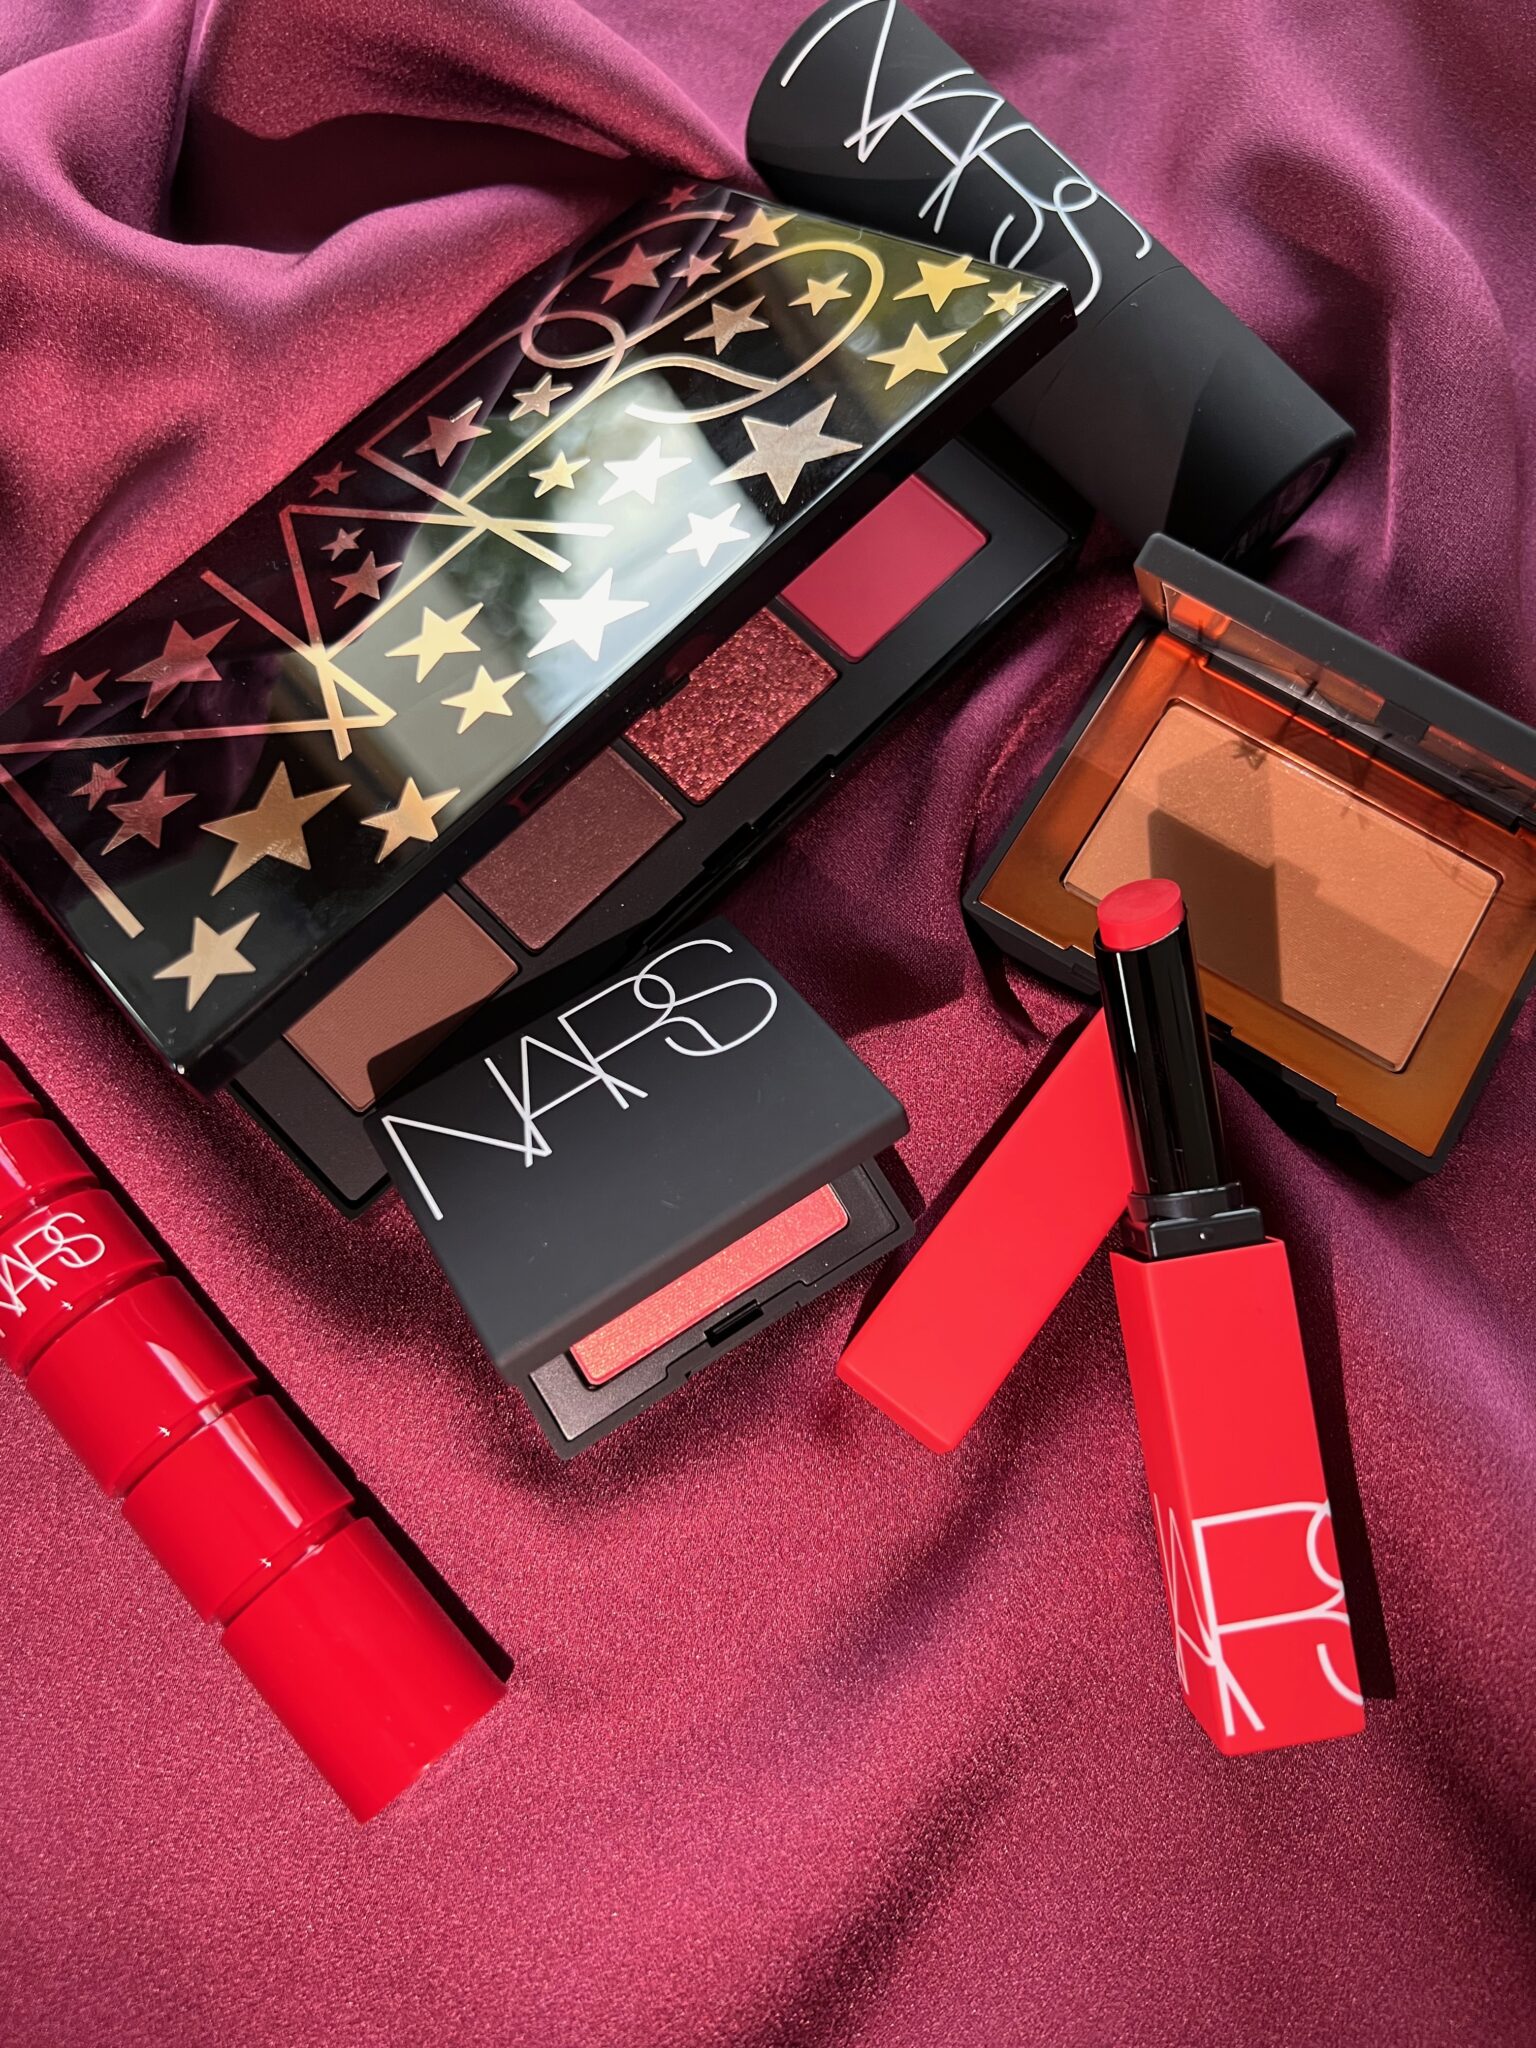 Christmas at Sephora - Top Holiday 2022 Gift Sets For Women. Nars, Sephora, Benefit and more. 10